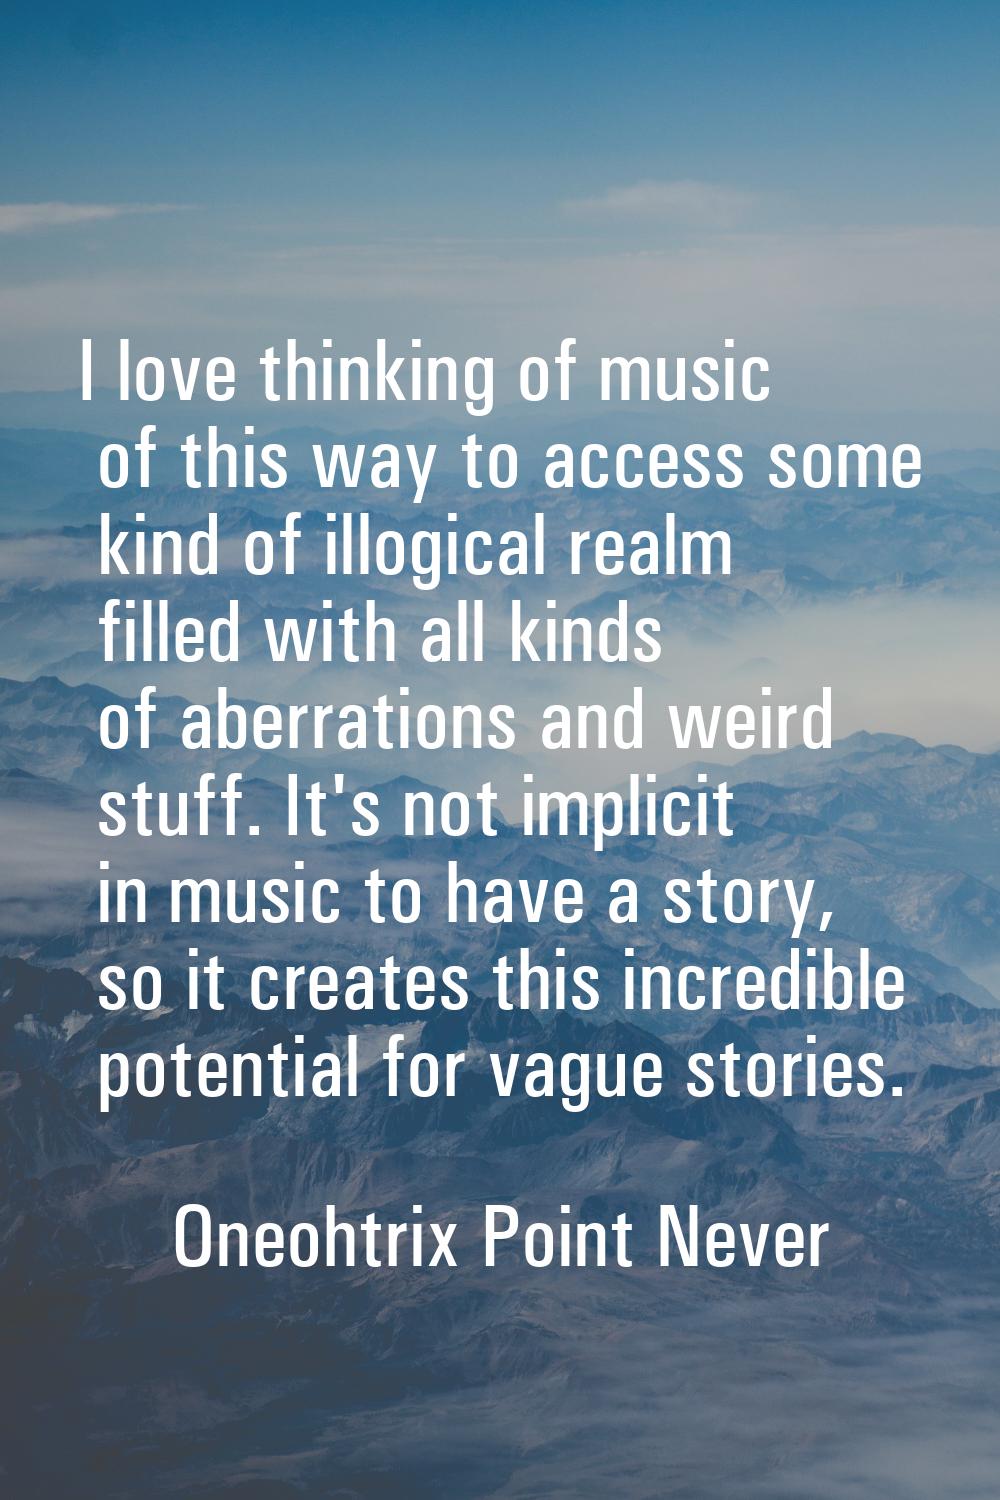 I love thinking of music of this way to access some kind of illogical realm filled with all kinds o